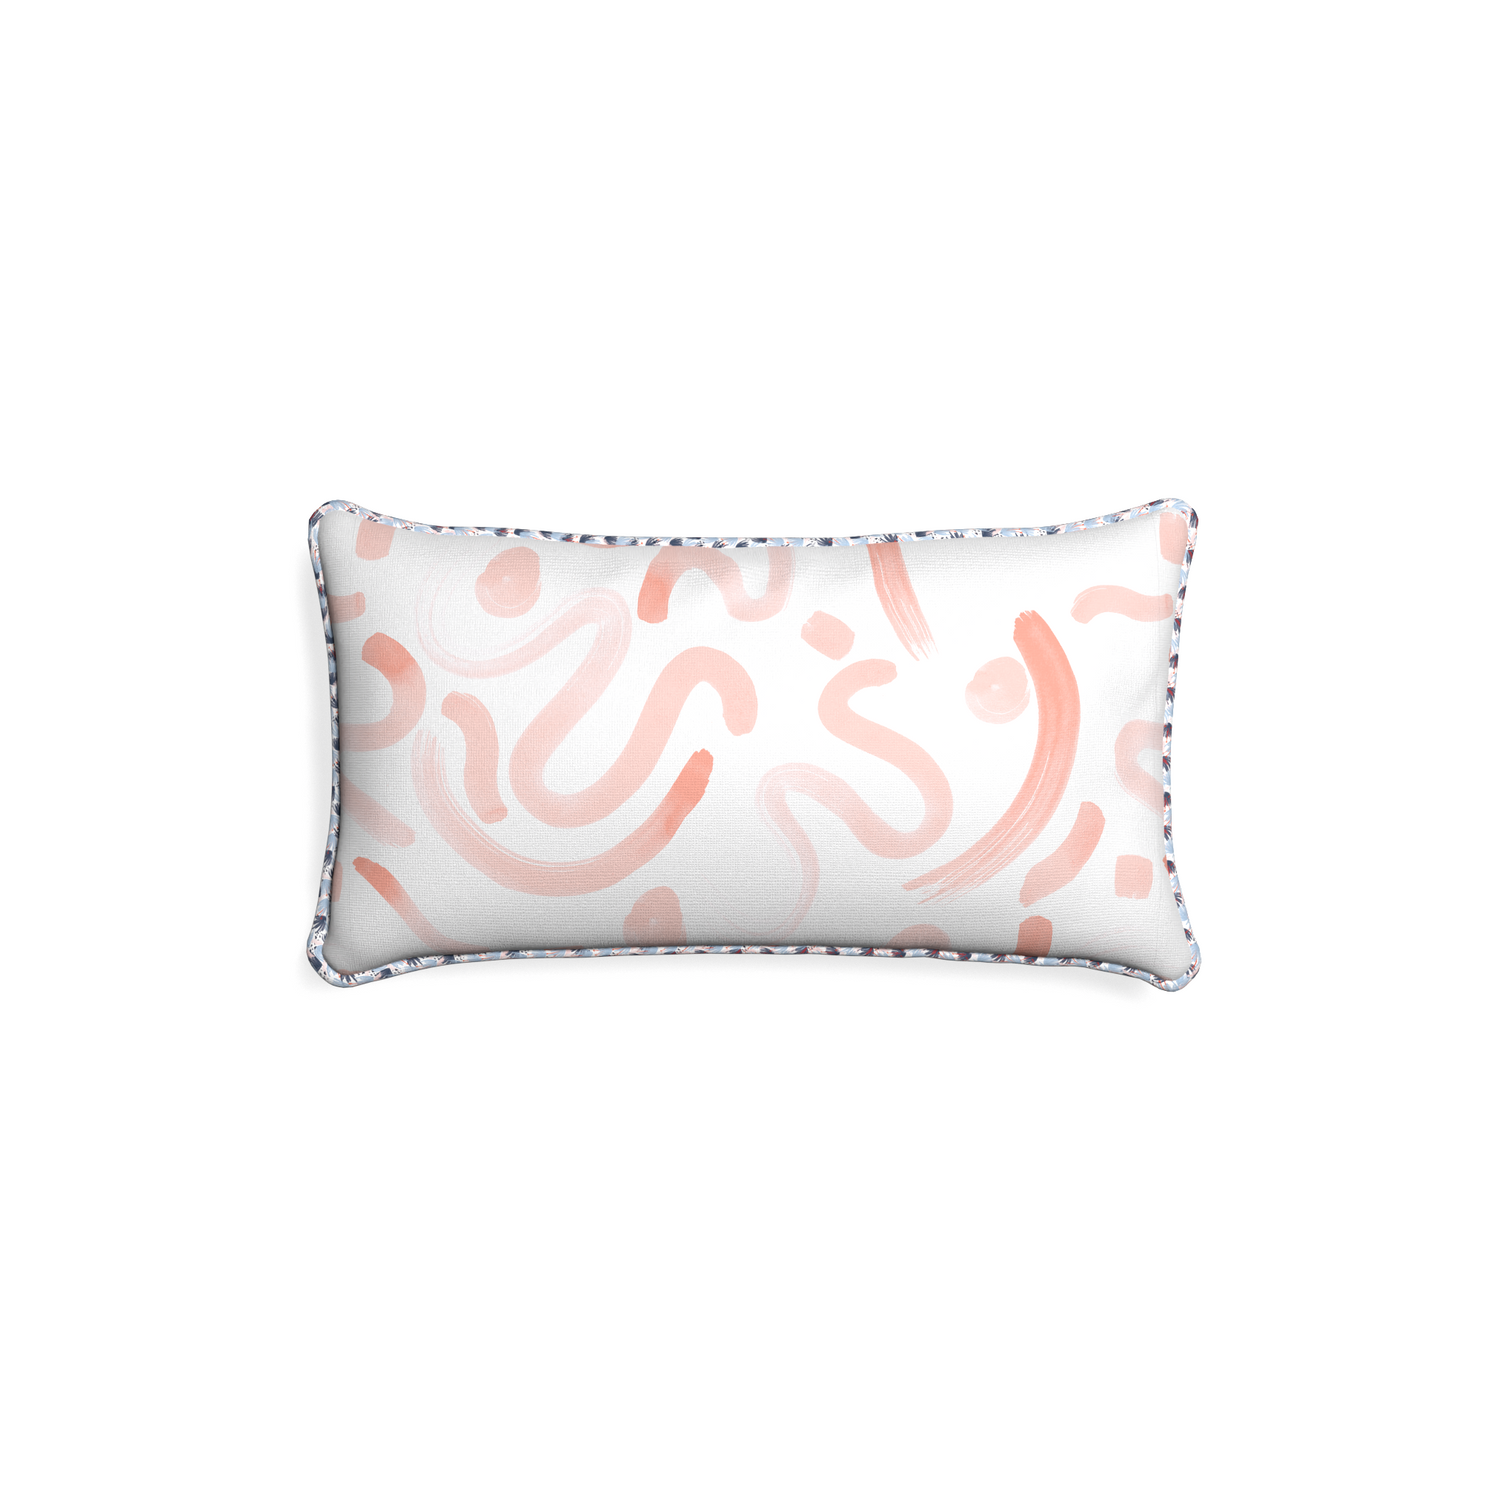 Petite-lumbar hockney pink custom pink graphicpillow with e piping on white background